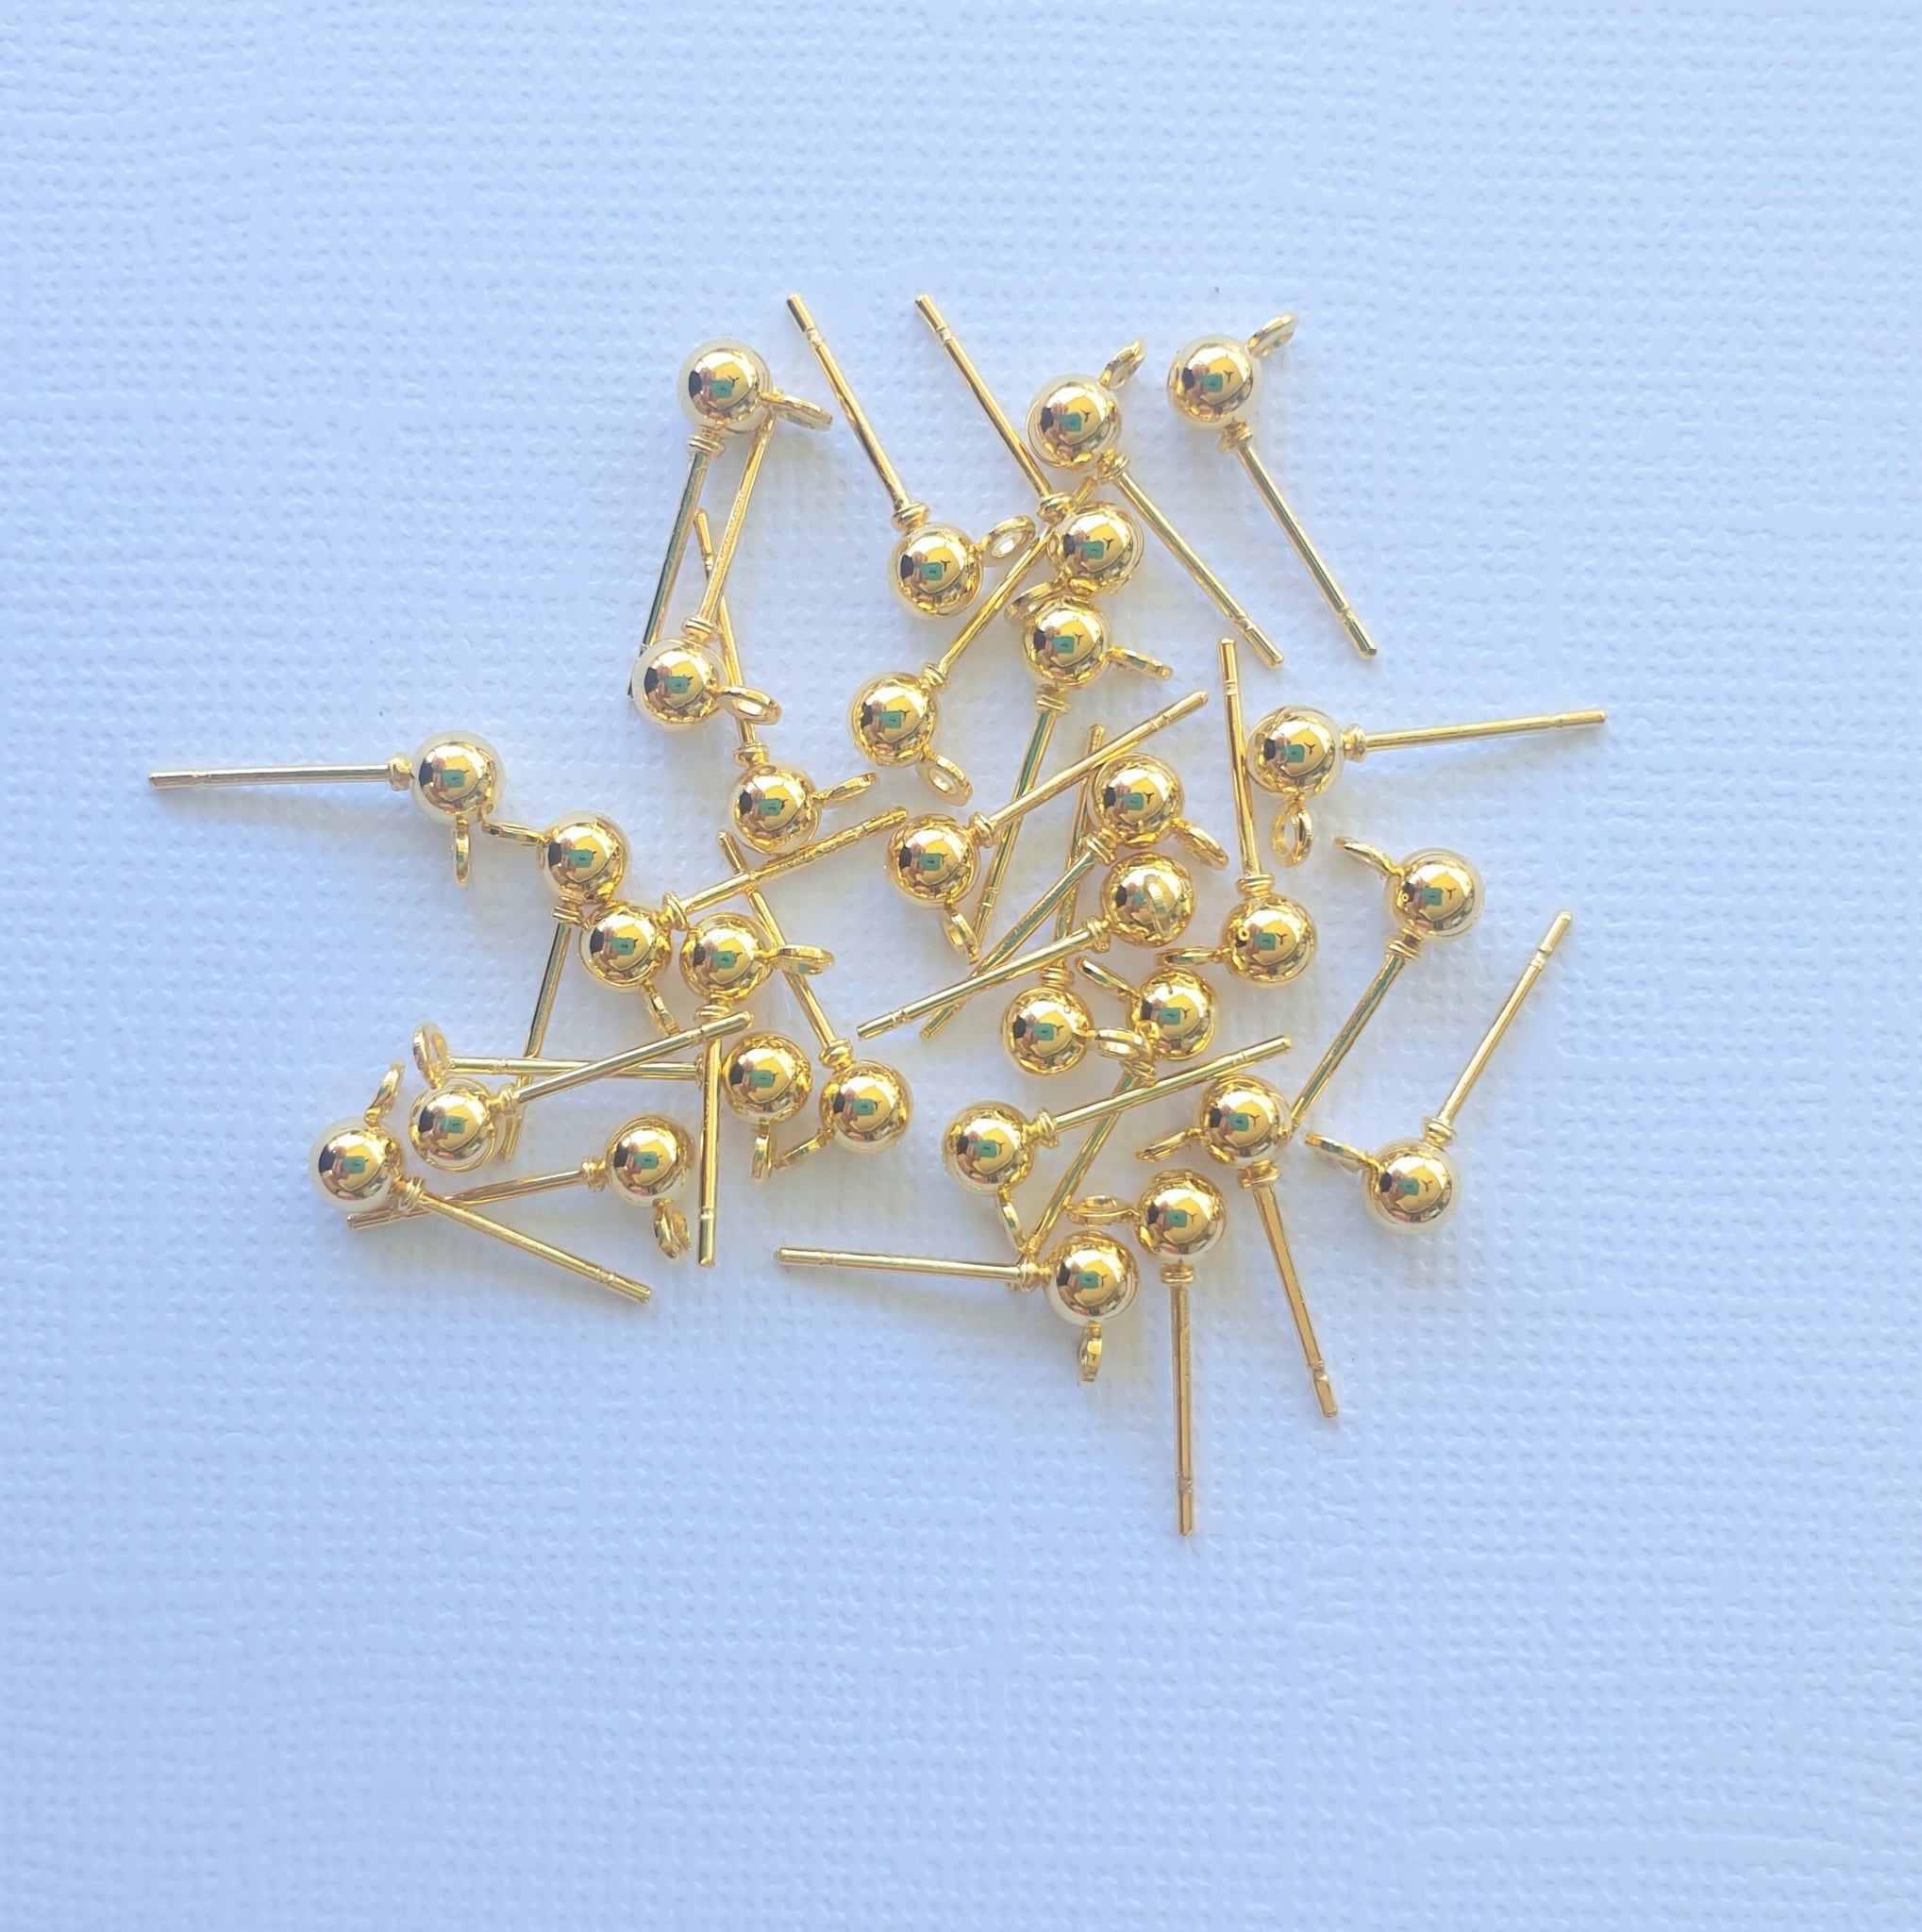 10pcs (5prs) 3/4/5mm Round Ball Earrings, Earring Pins, Gold Ball Earring, Earring Connectors, Jewellery making supplies